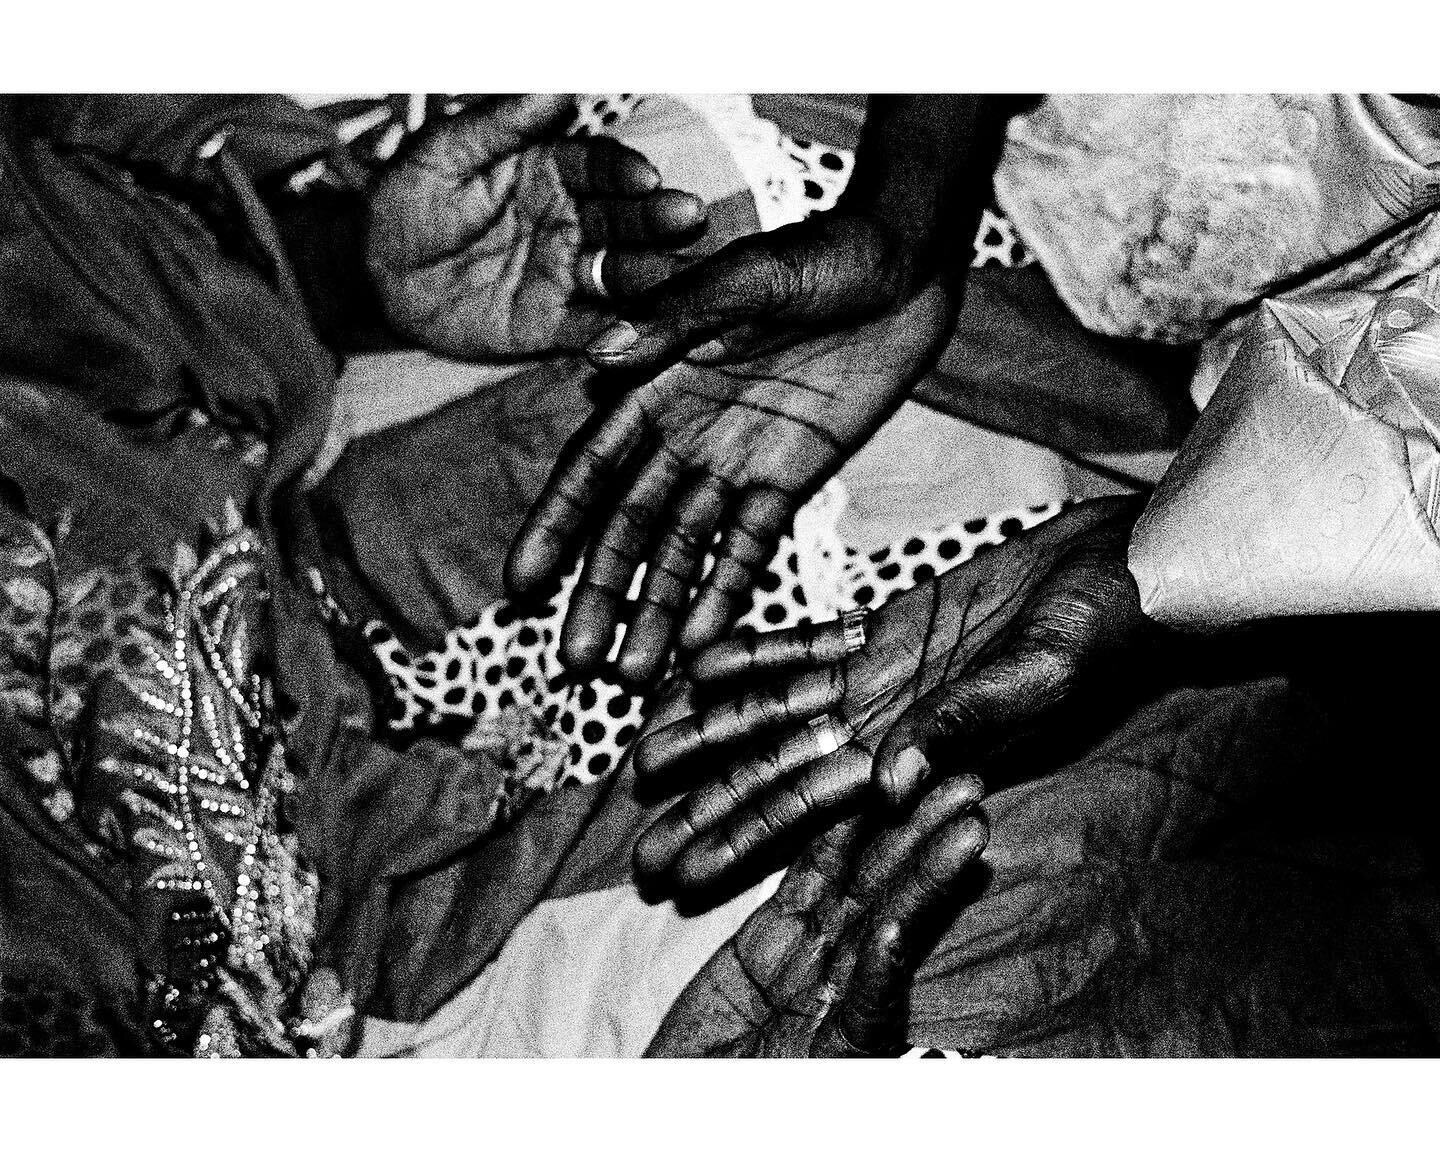 Hands, Kofaye and his mother, Dakar

Kofaye: &ldquo;Whenever I leave Senegal to come back to Germany and end my holidays I always see my mother. It is a quality for me. 
It&rsquo;s like a meditation time for both of us. We connect and somehow it feel